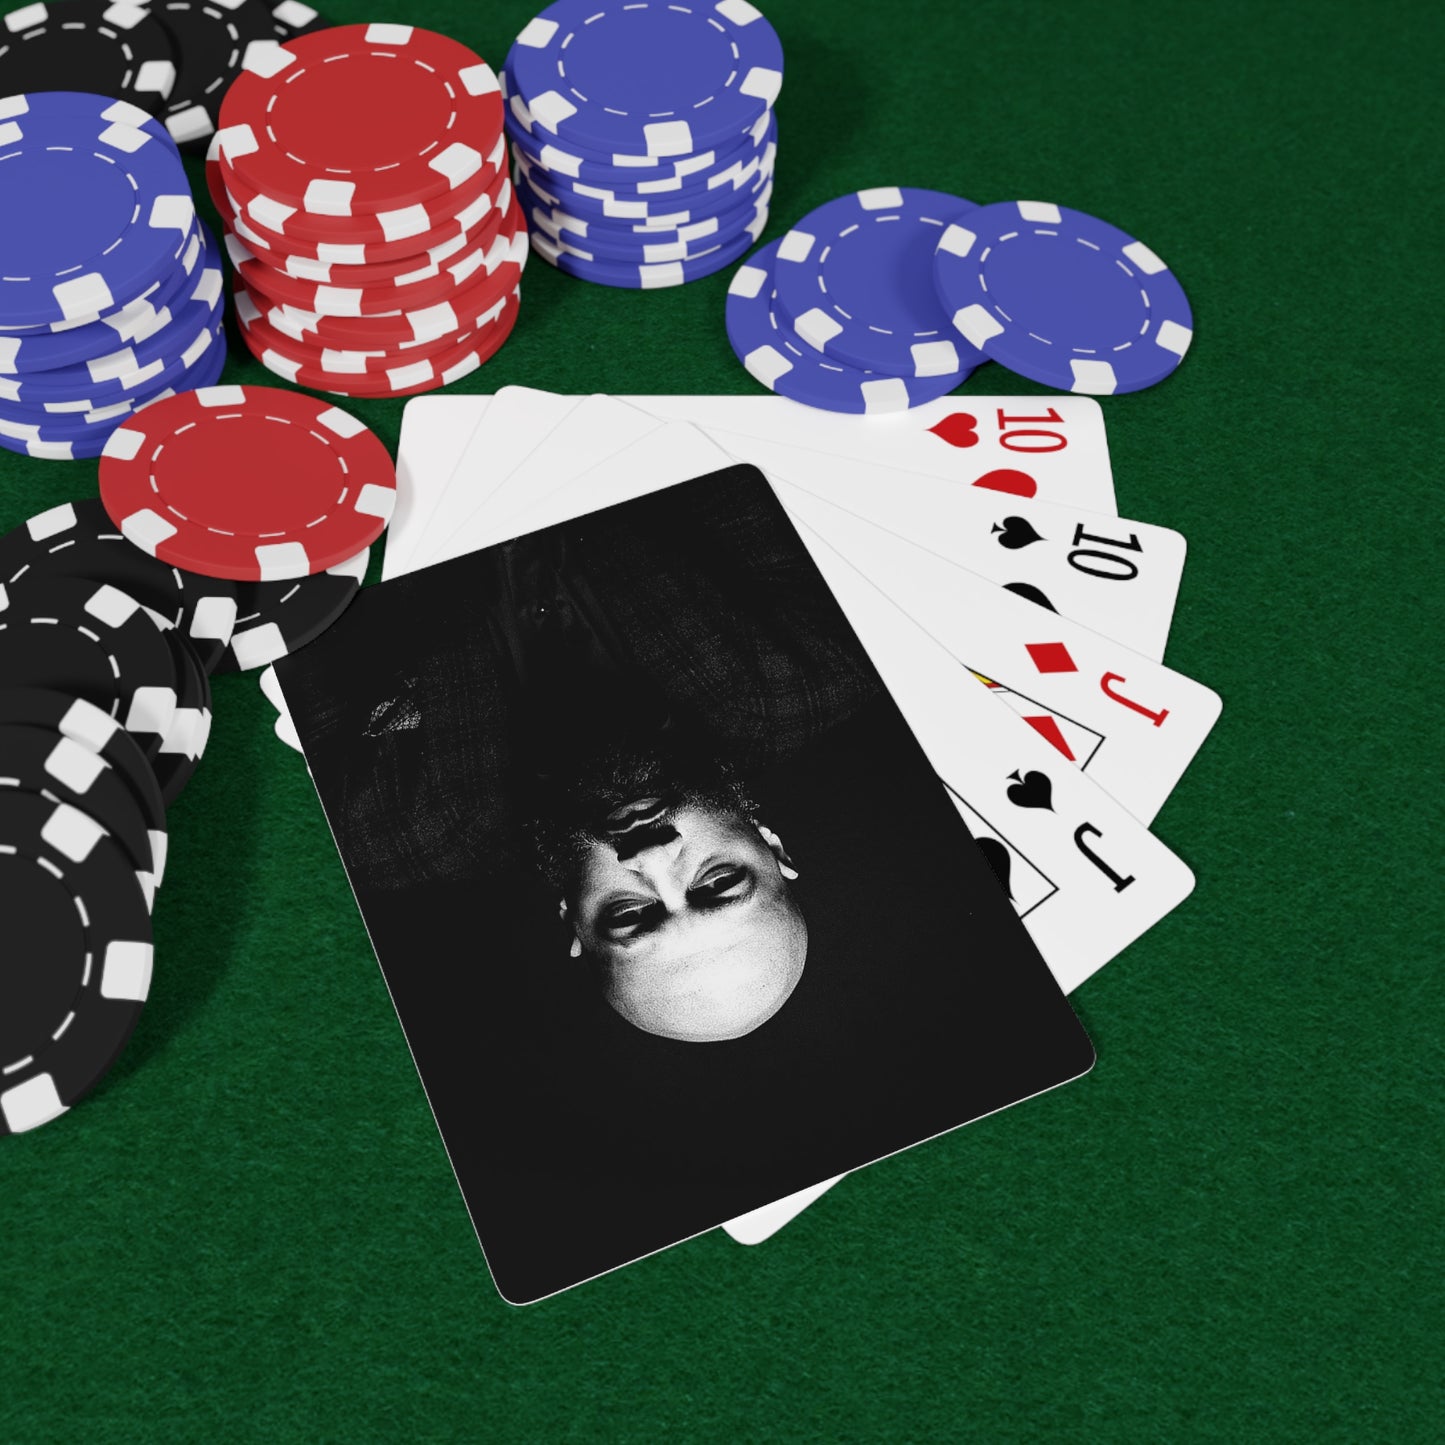 Please Call Me Crazy (Poker Cards)